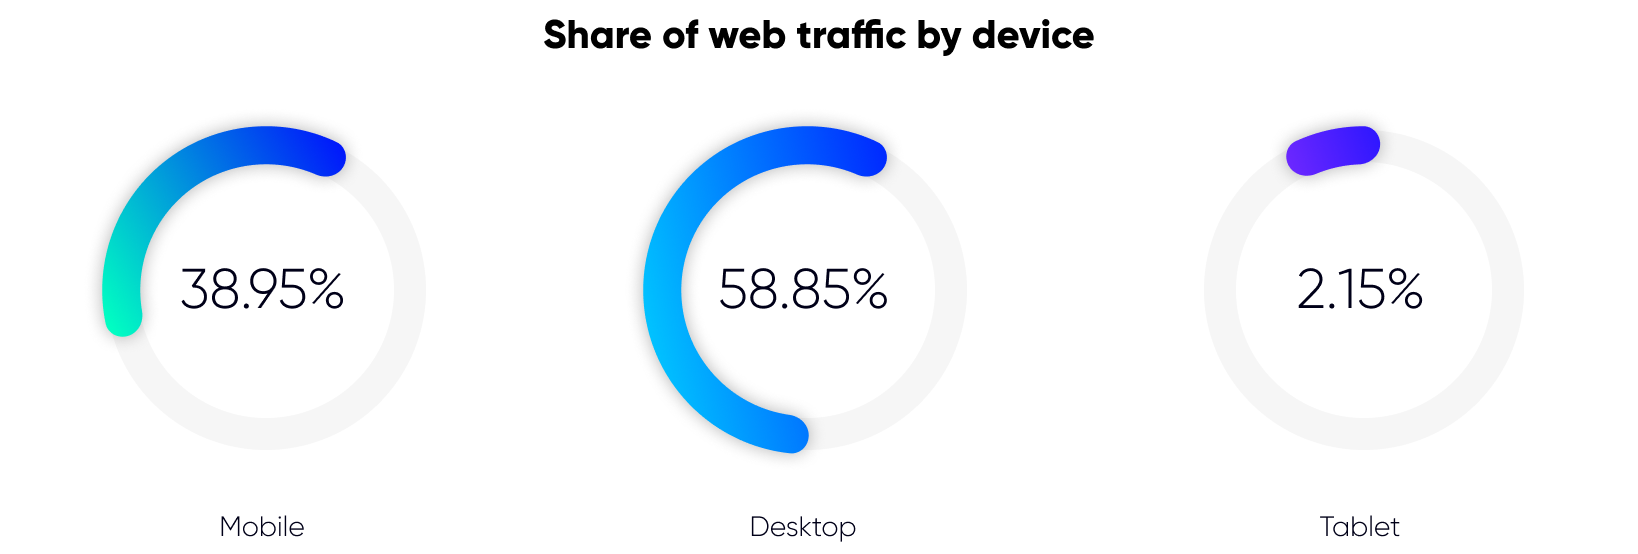 Share of web traffic by device in Austria